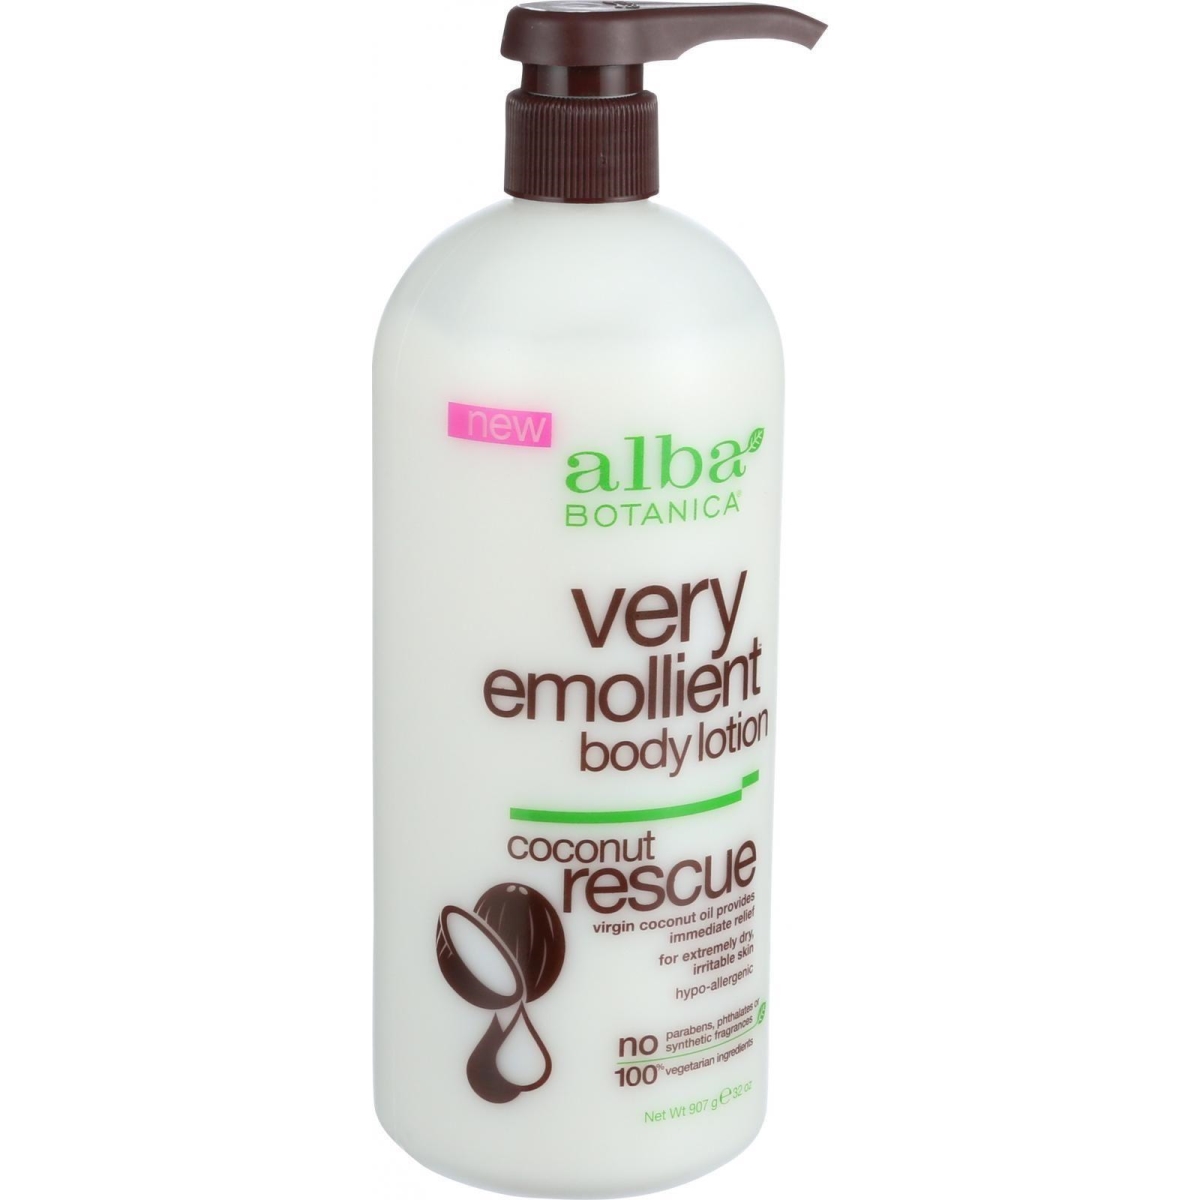 Picture of Alba Botanica HG1603810 32 oz Very Emollient Body Lotion, Coconut Rescue